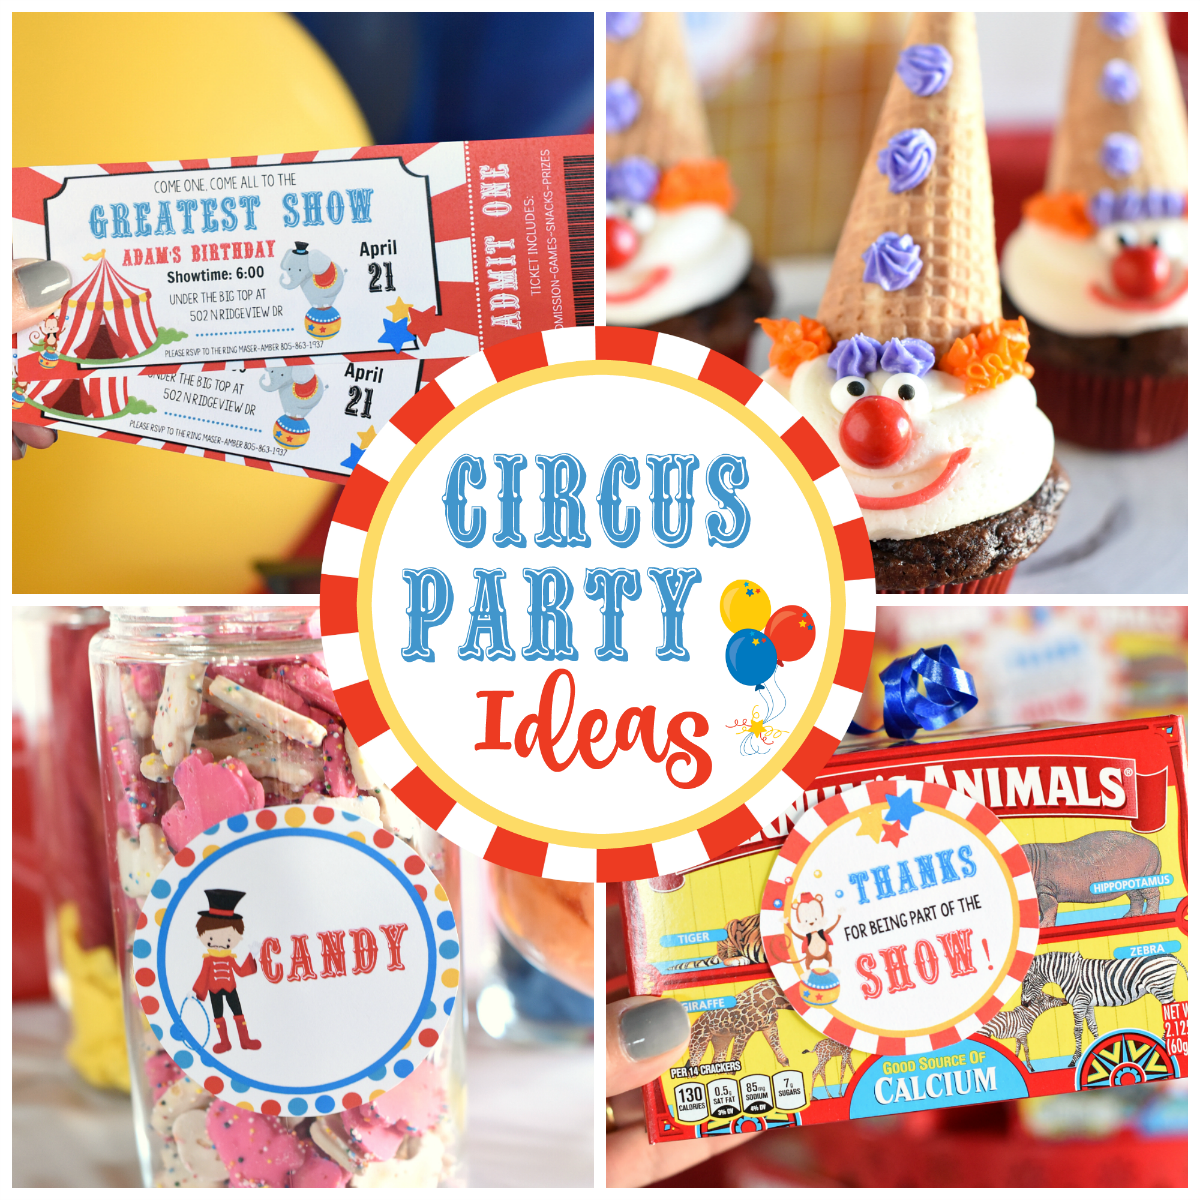 How to Throw an Amazing Circus Theme Party